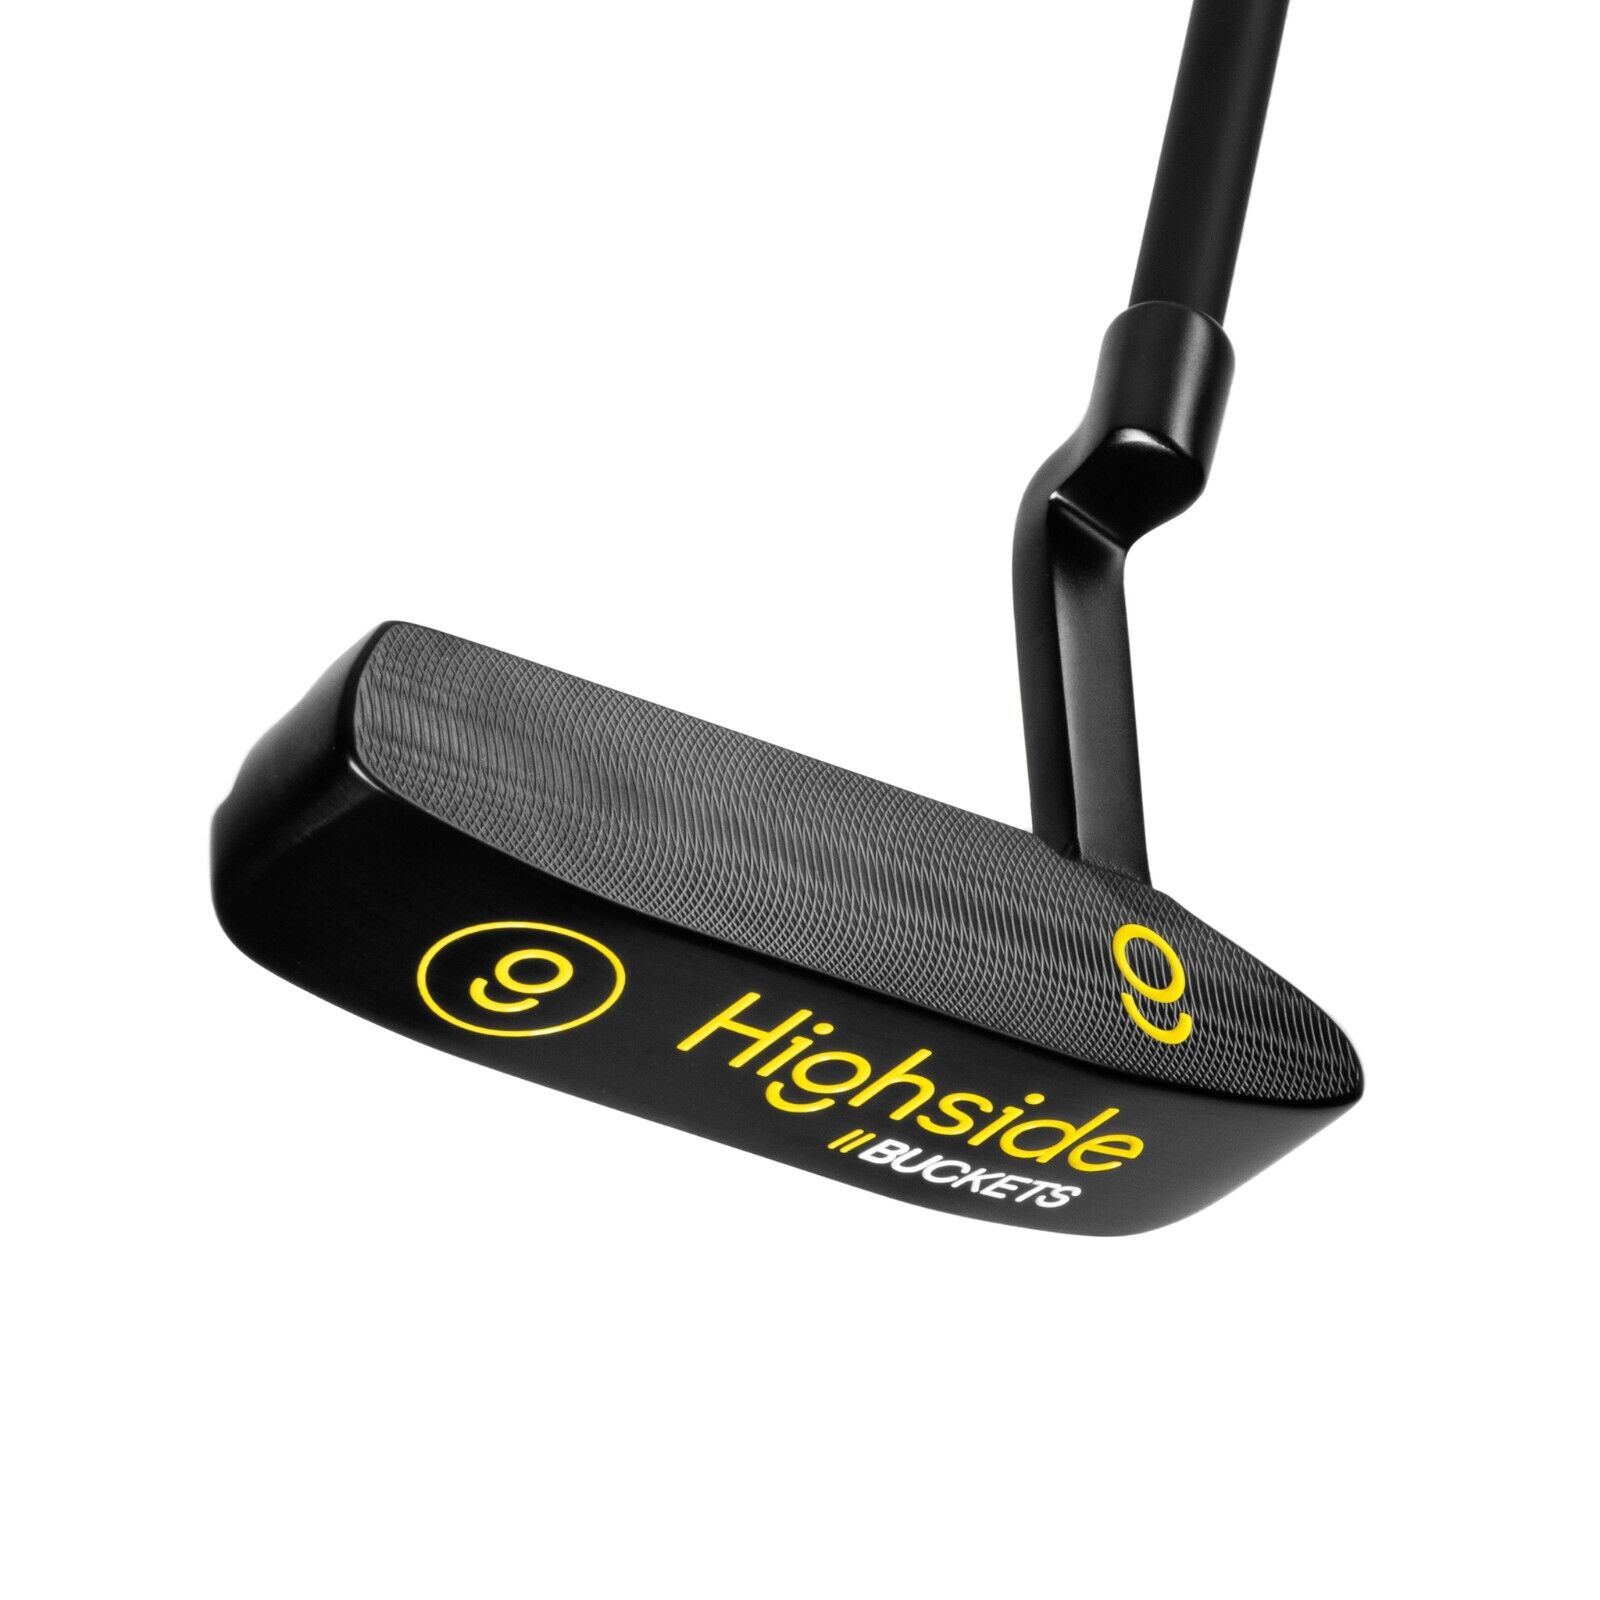 Buckets Blade Putter - Right-Handed - Precision Milled Face - Graphite Shaft